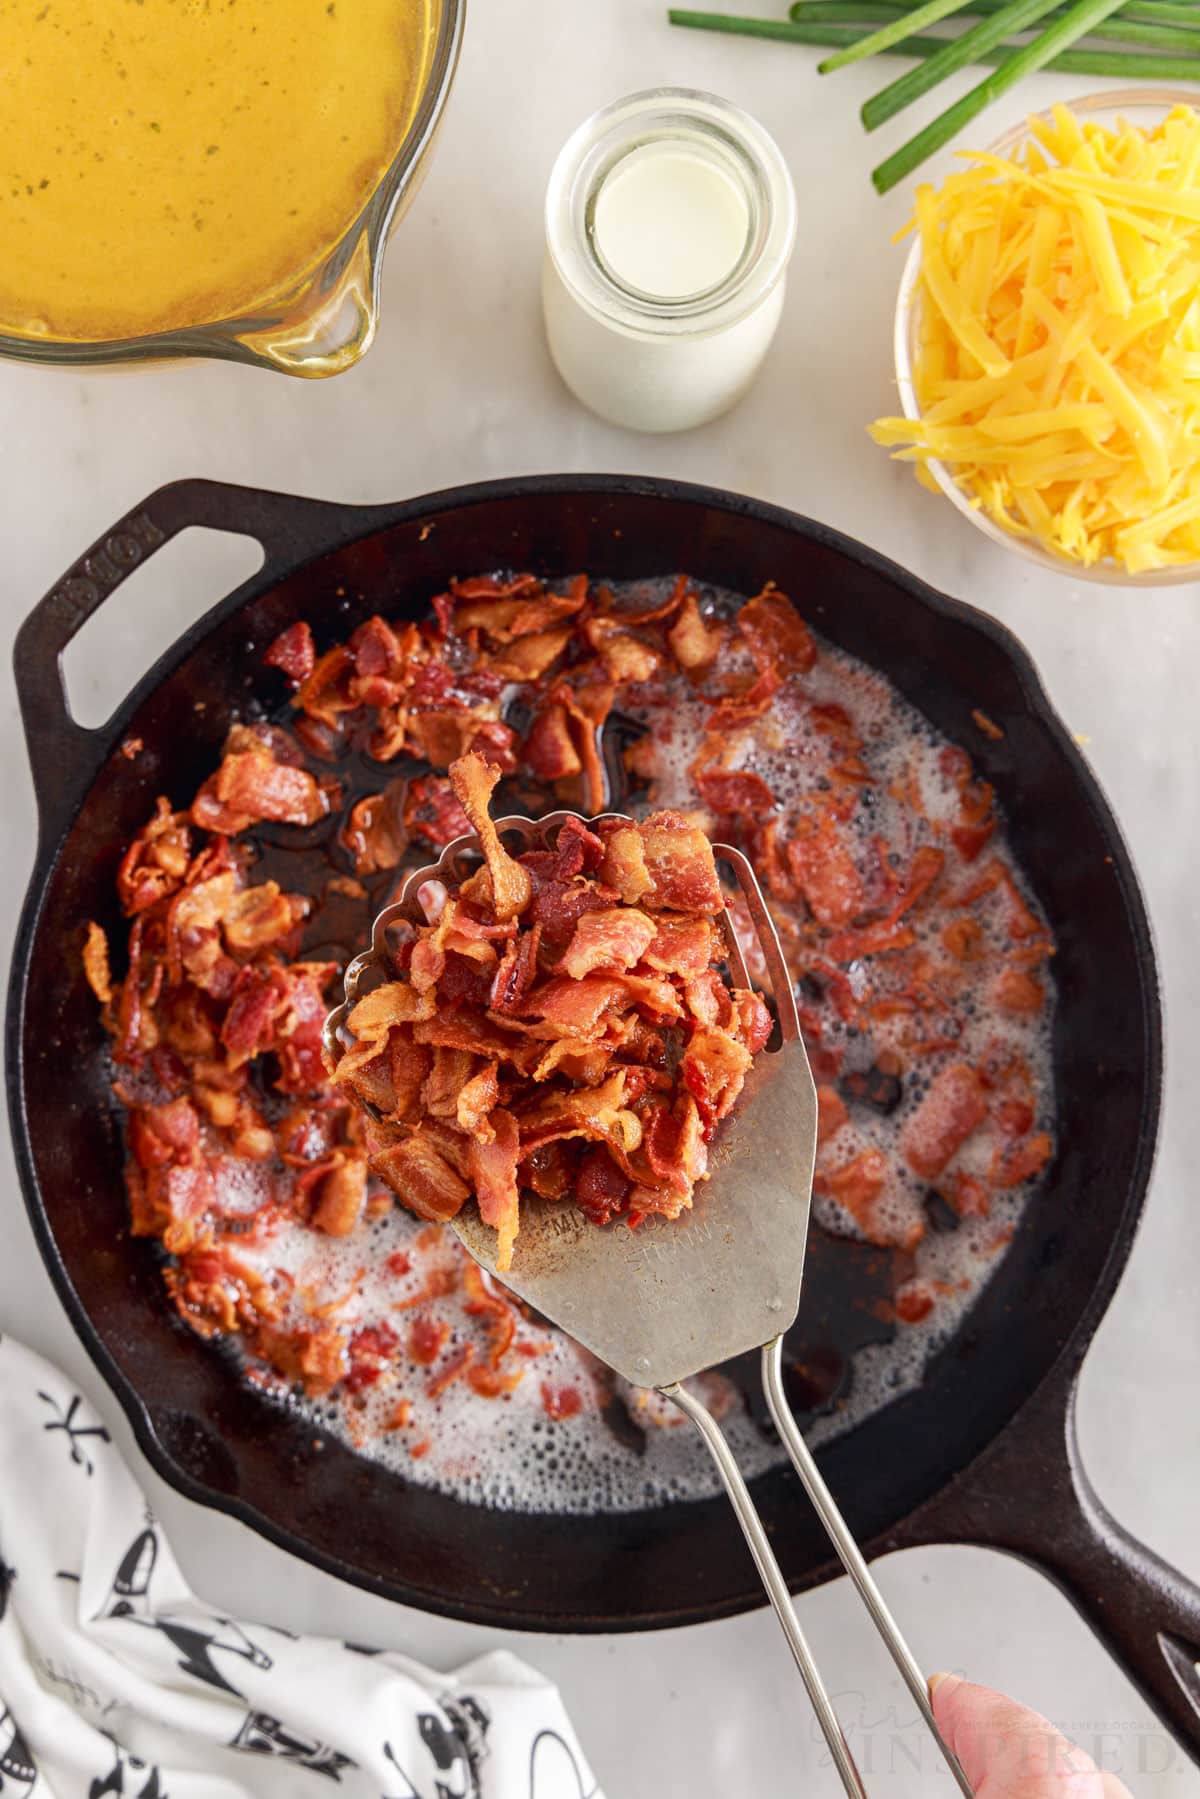 slotted spoon lifting out cooked bacon from skillet next to additional ingredients